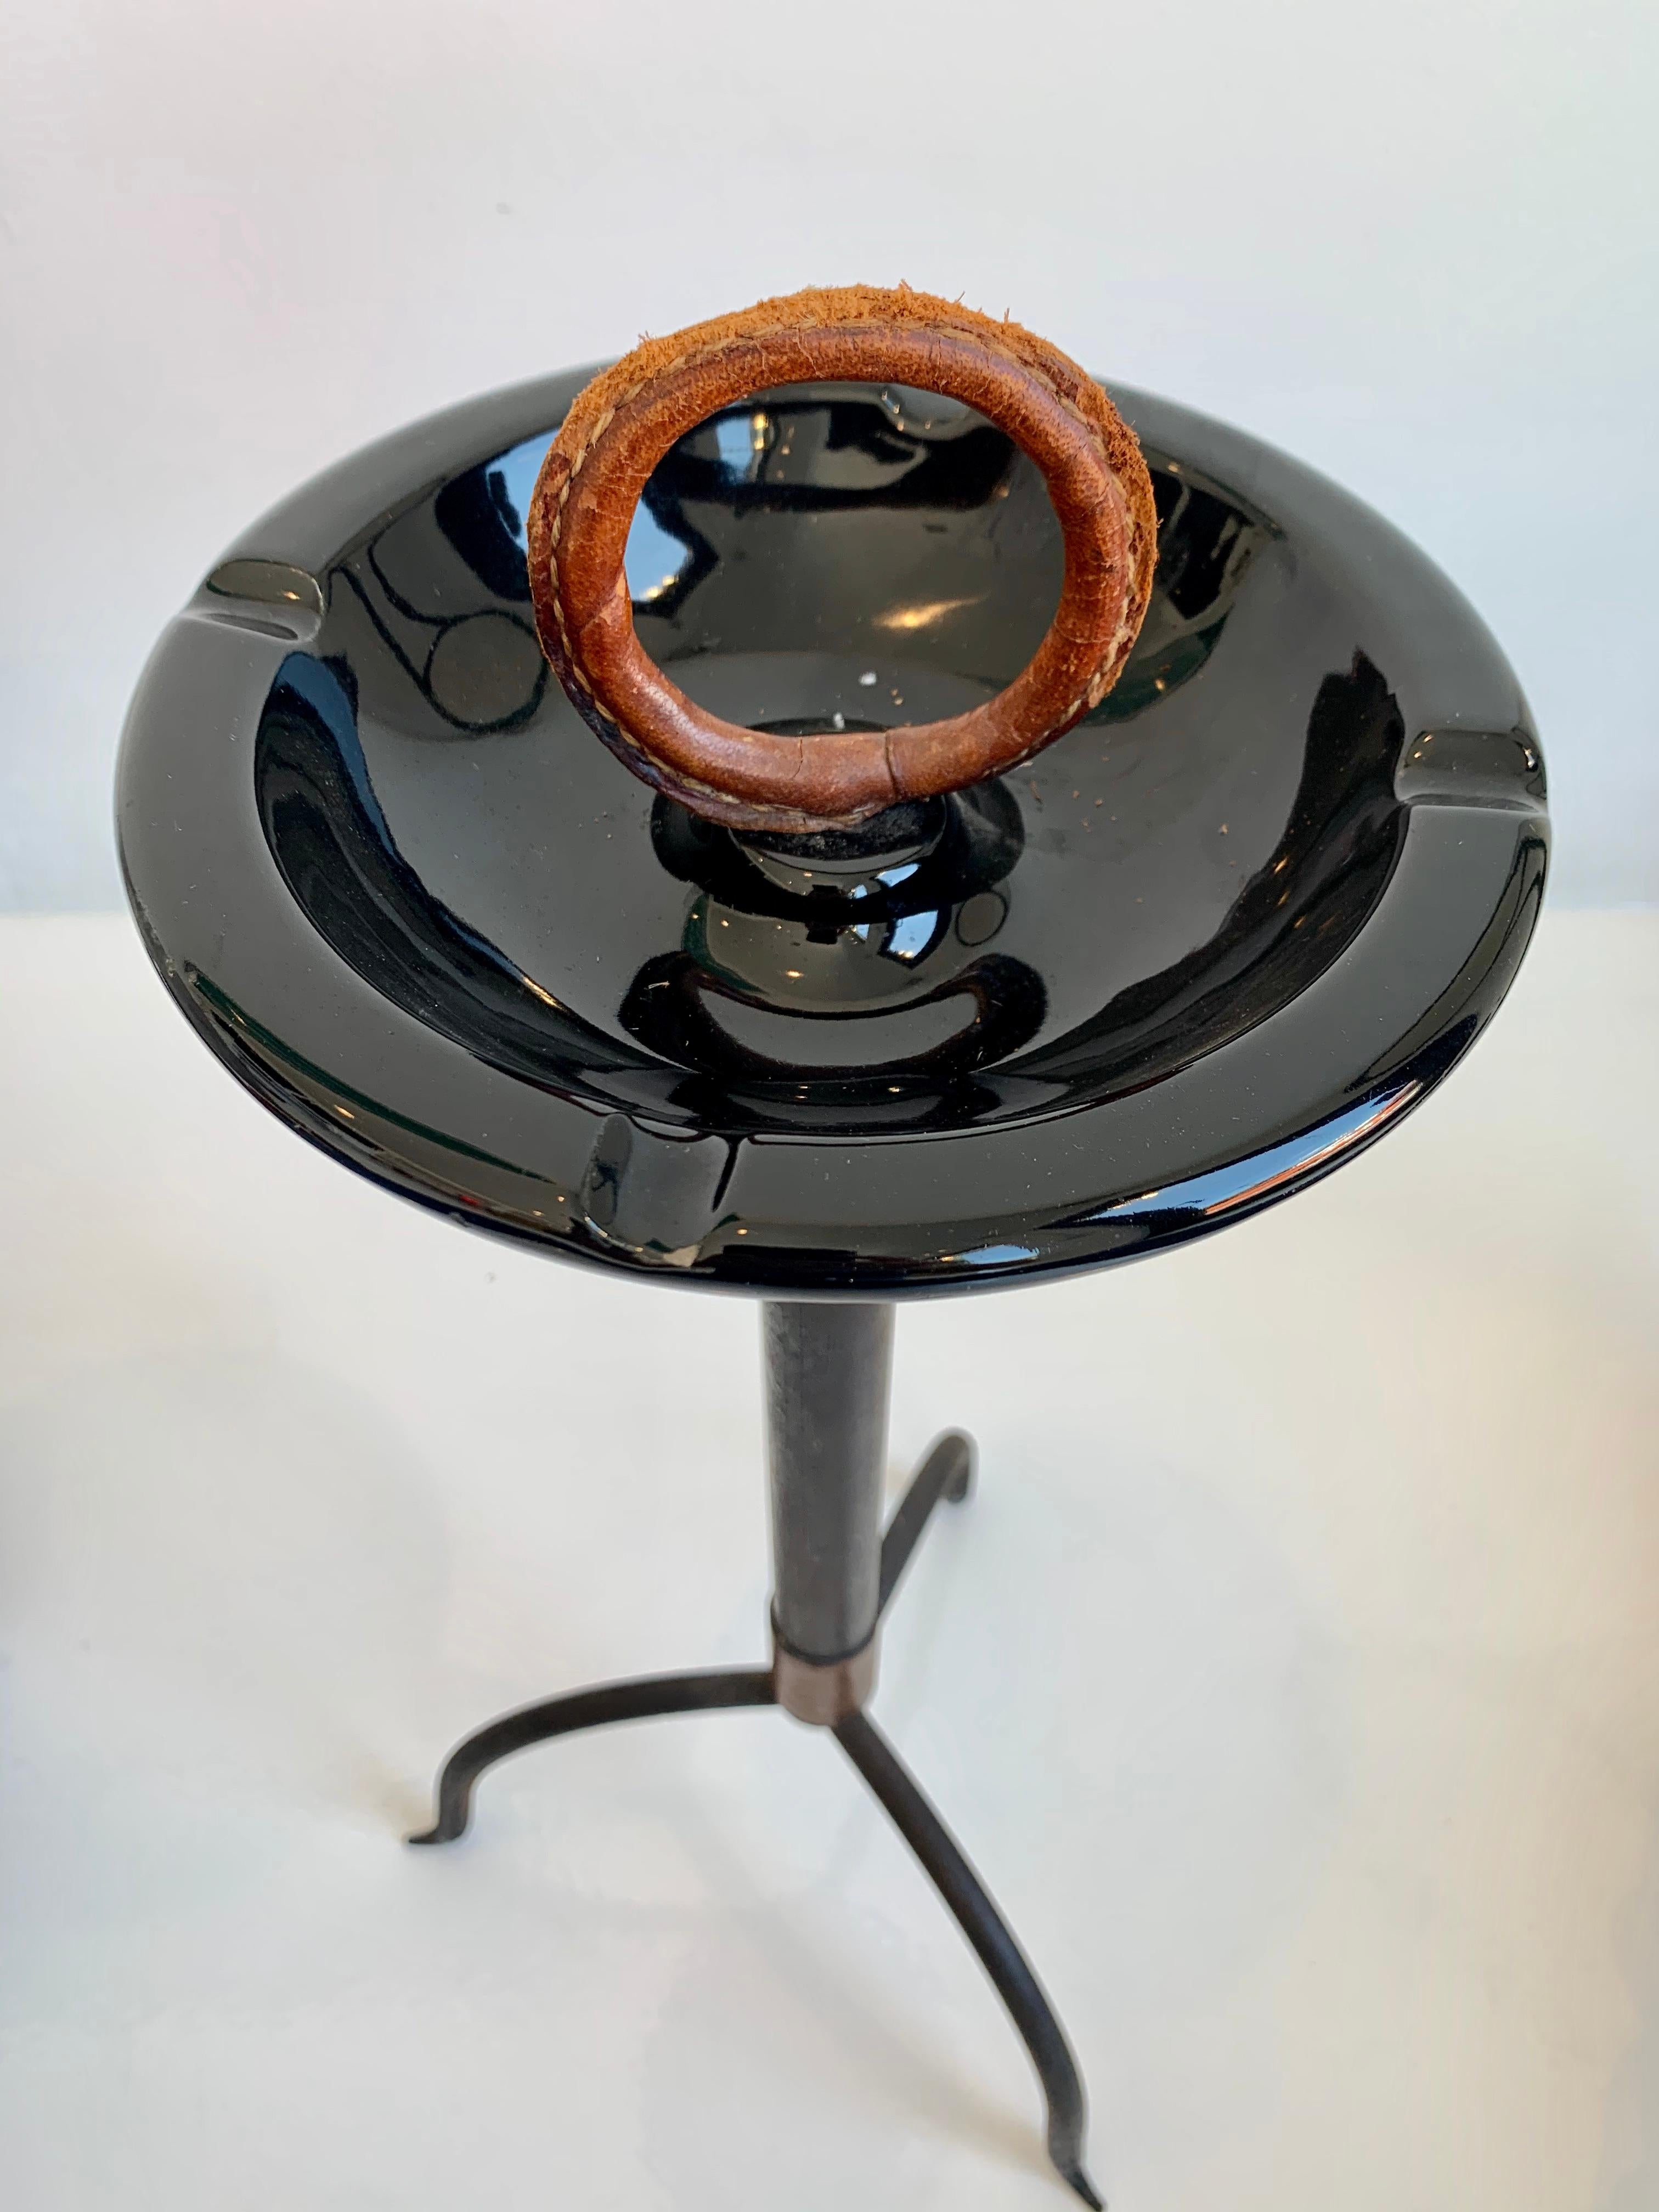 Stunning leather and iron catchall / ashtray by Jacques Adnet. Iron frame on three slender legs. Ceramic dish with saddle leather, circular pull on top. Saddle leather wrap at bottom of iron frame as well. Signature Adnet contrast stitching. Great